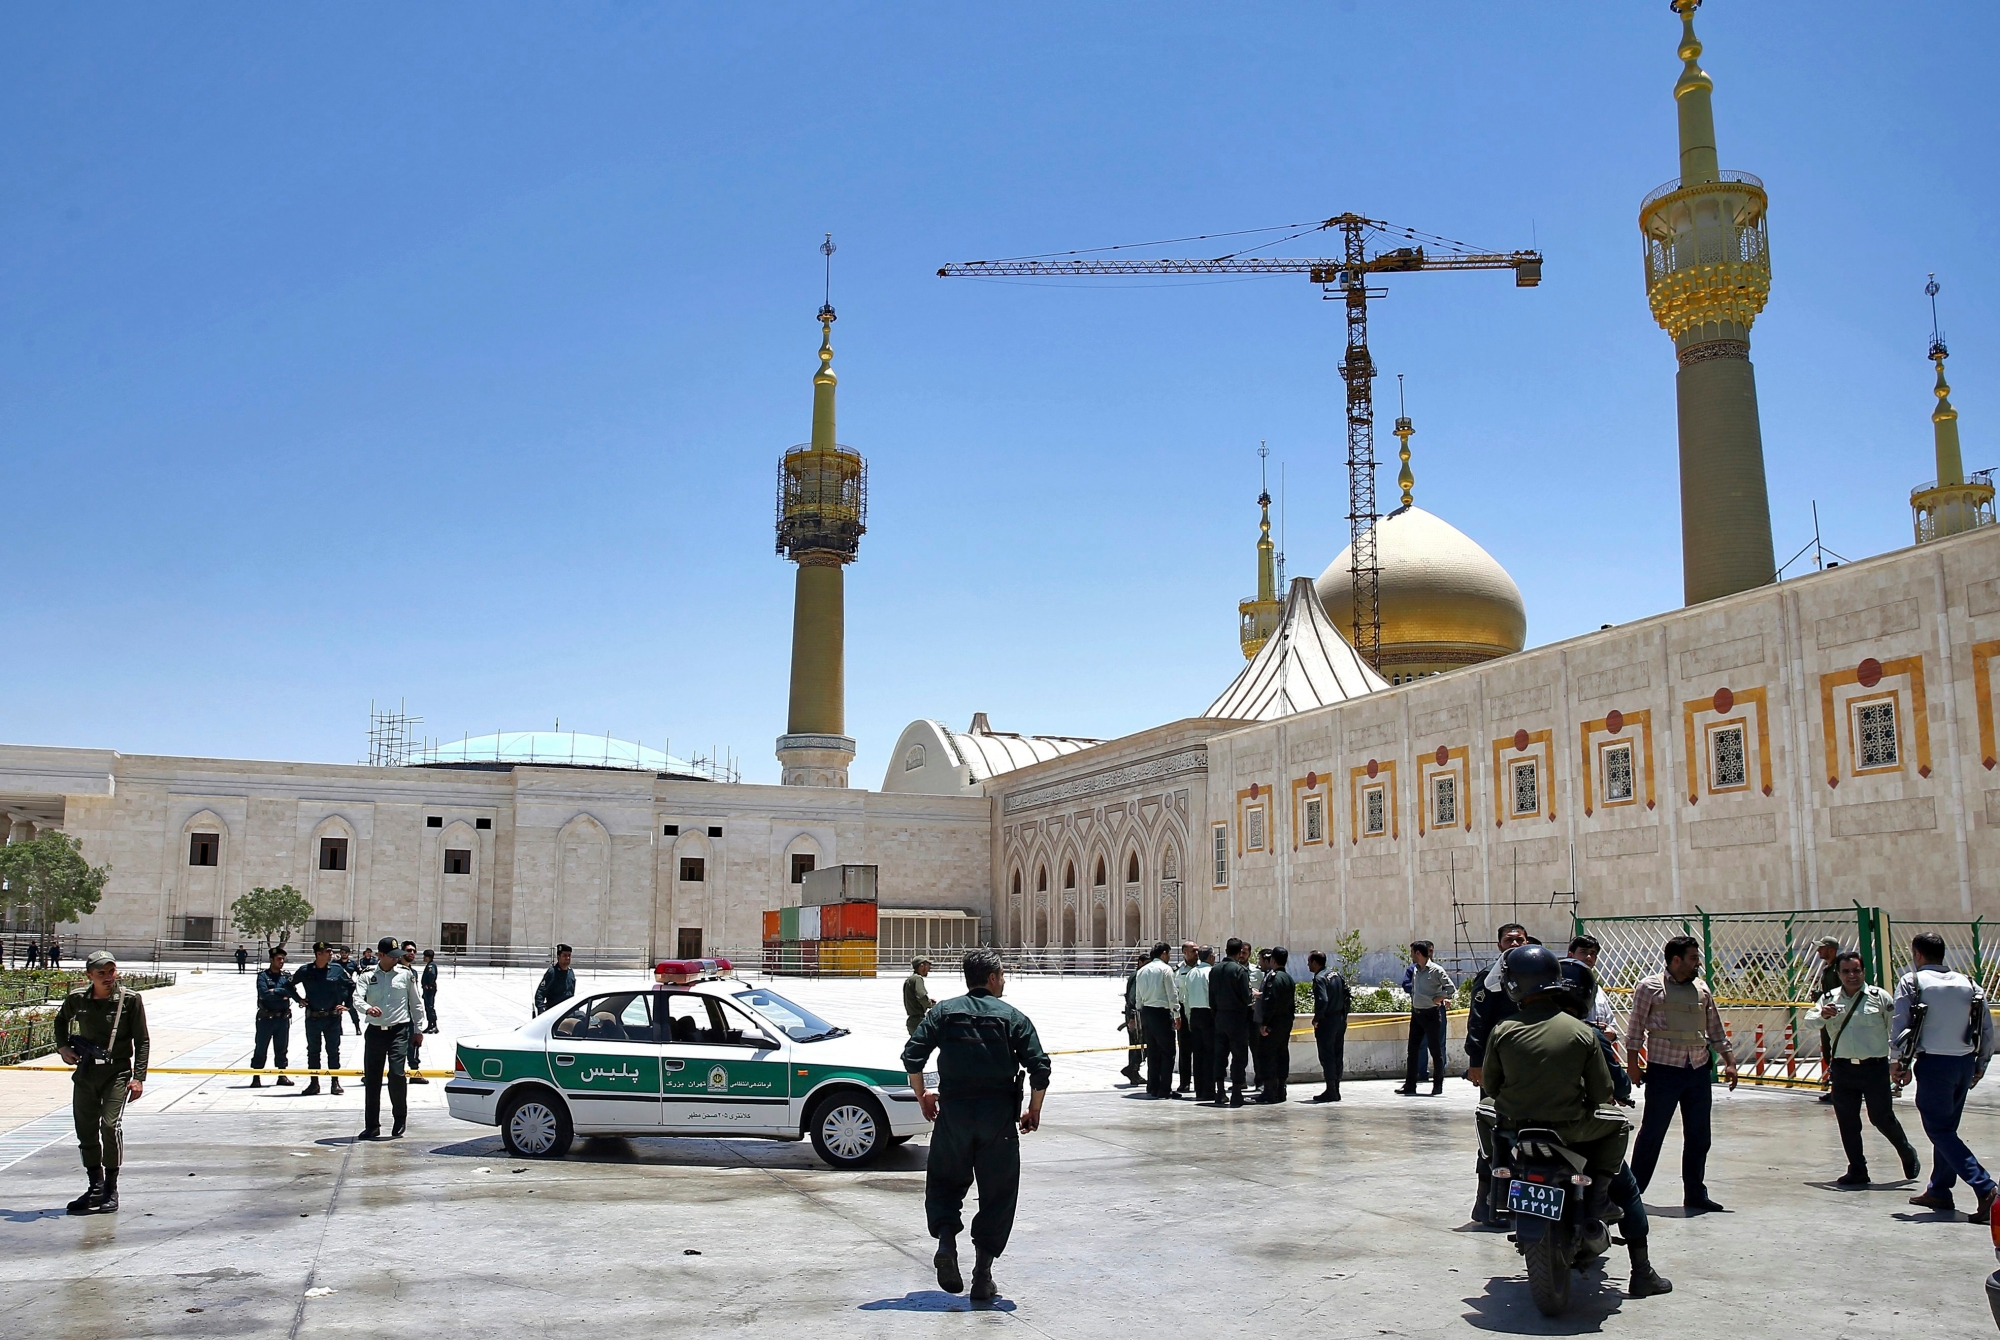 Police officers control the scene, around of shrine of late Iranian revolutionary founder Ayatollah Khomeini, after an assault by several attackers in Tehran, just outside Tehran, Iran, Wednesday, June 7, 2017. Suicide bombers and gunmen stormed into Iran's parliament and targeted the shrine of Ayatollah Ruhollah Khomeini on Wednesday, killing a security guard and wounding several other people in rare twin attacks, with the siege at the legislature still underway. (AP Photo/Ebrahim Noroozi) Iran